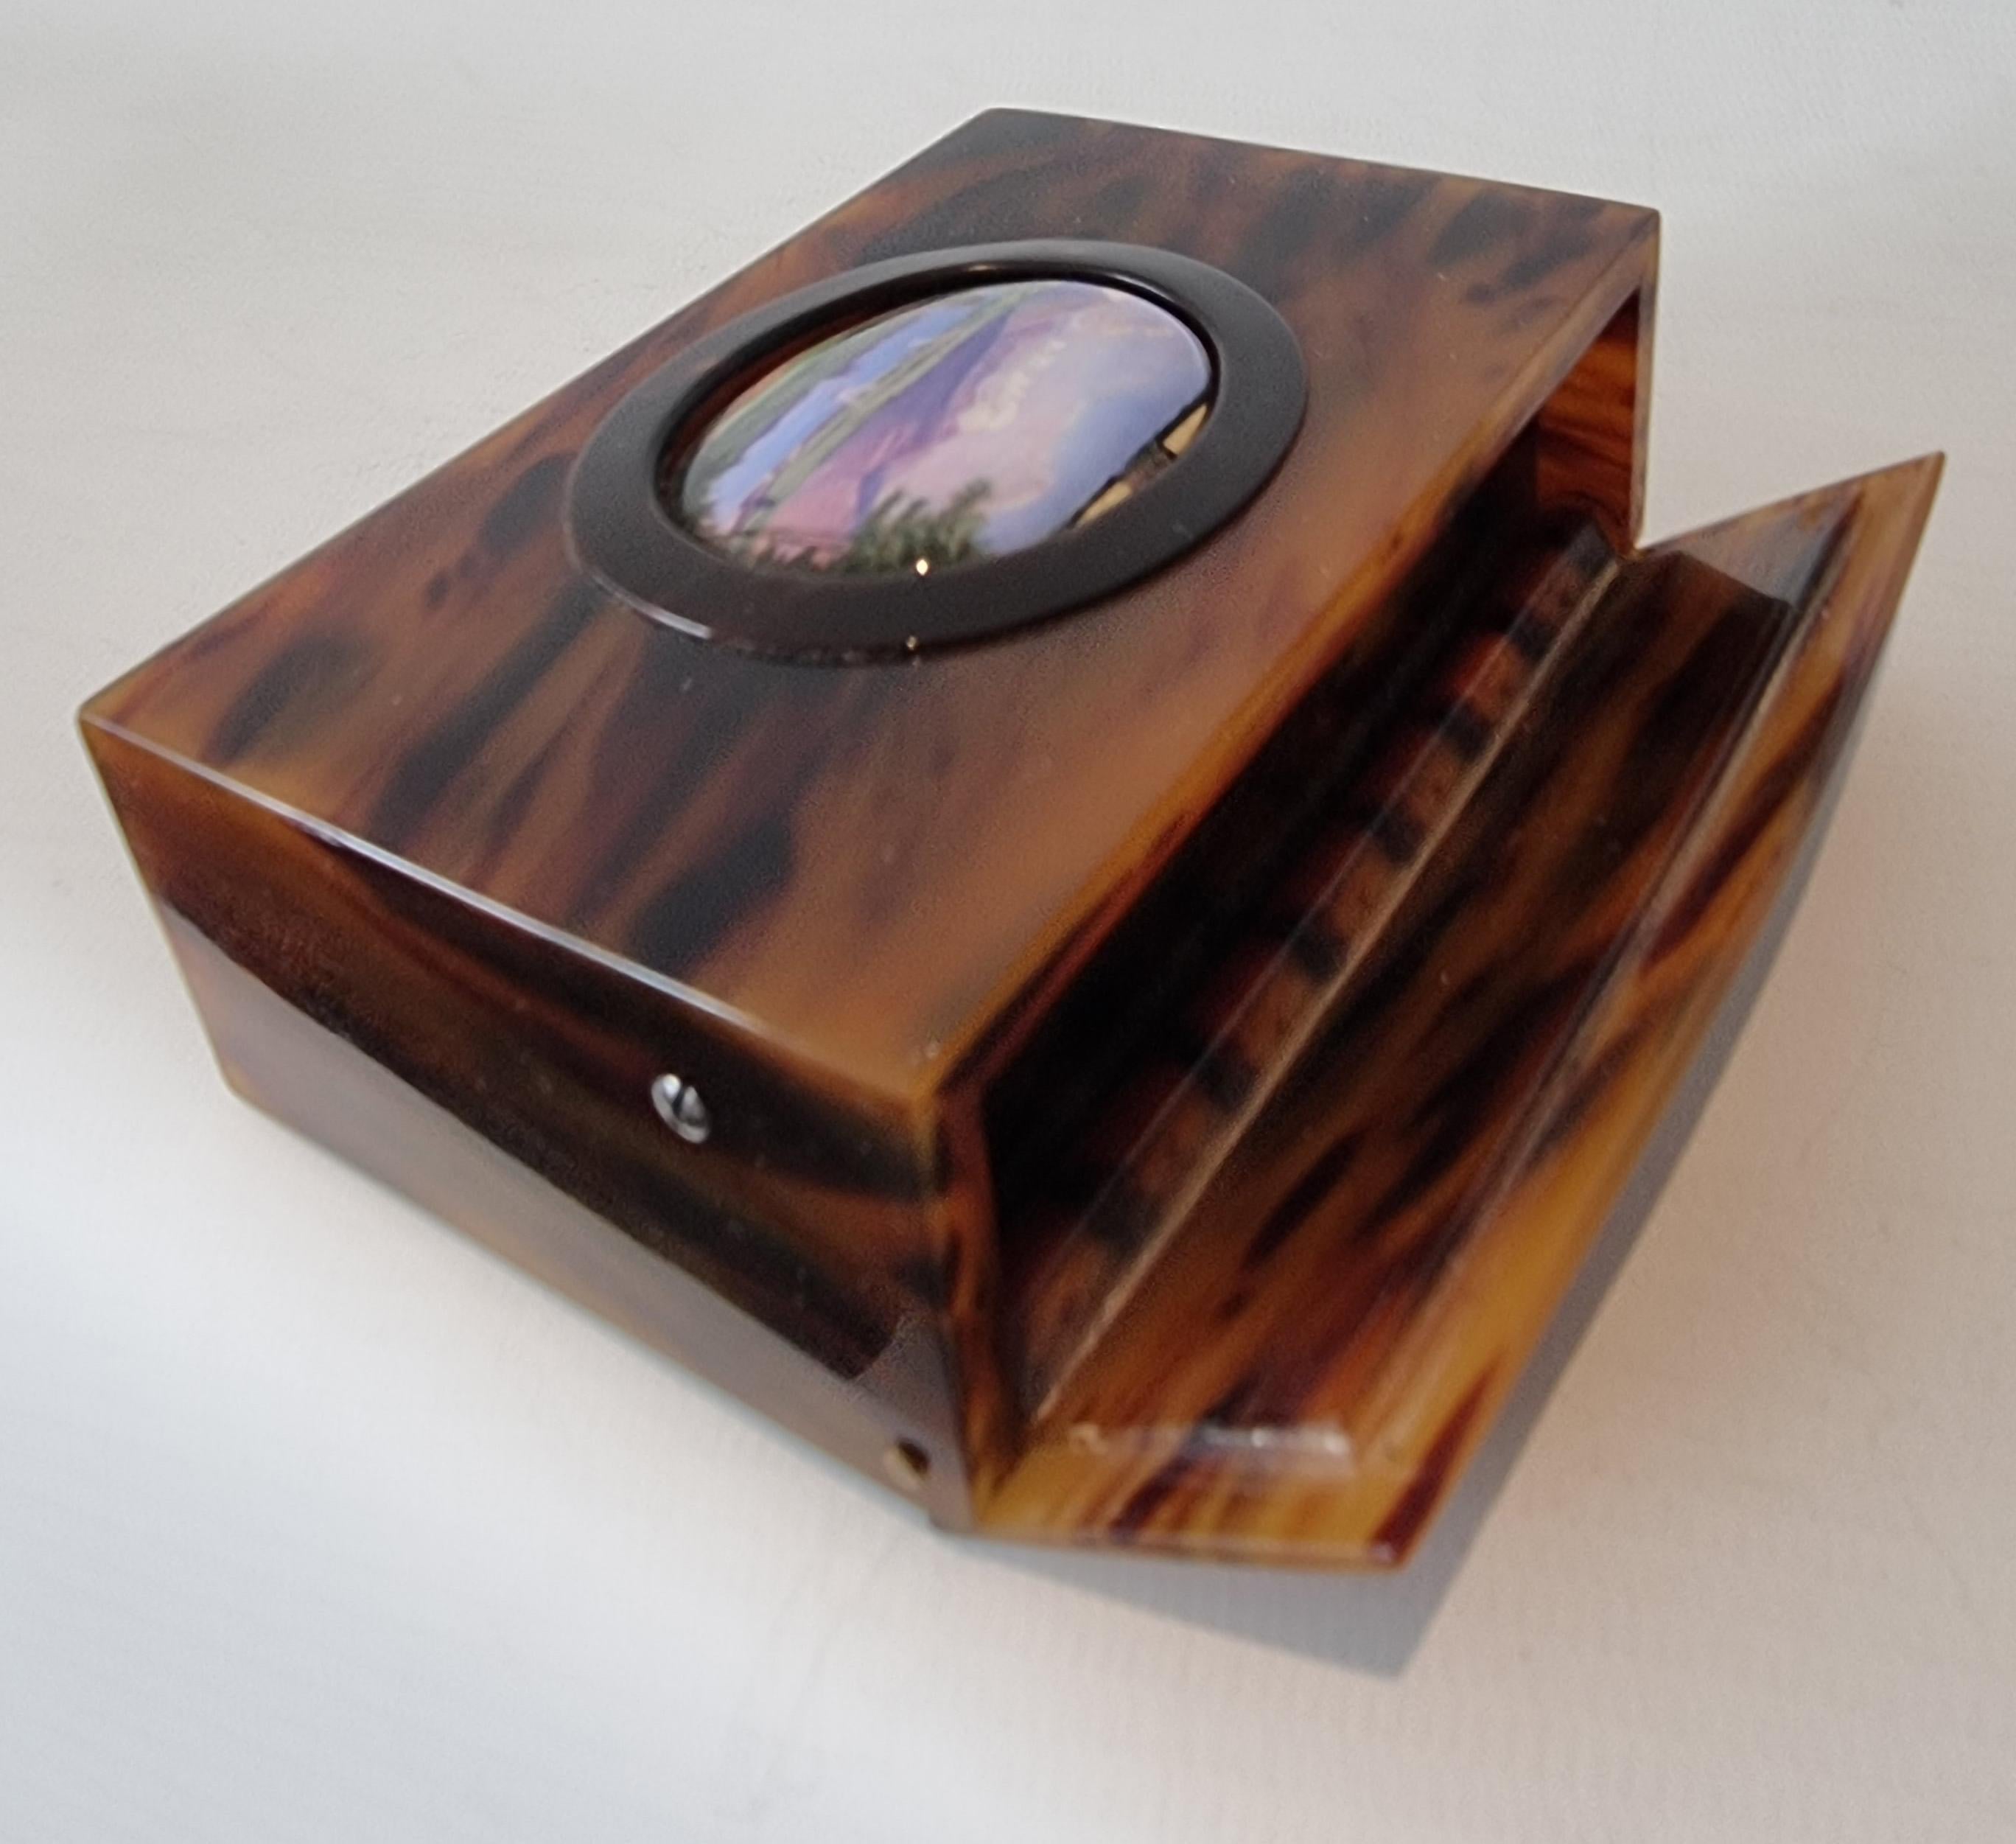 Antique Pictorial enamel and underbelly-cut tortoiseshell singing bird box For Sale 1